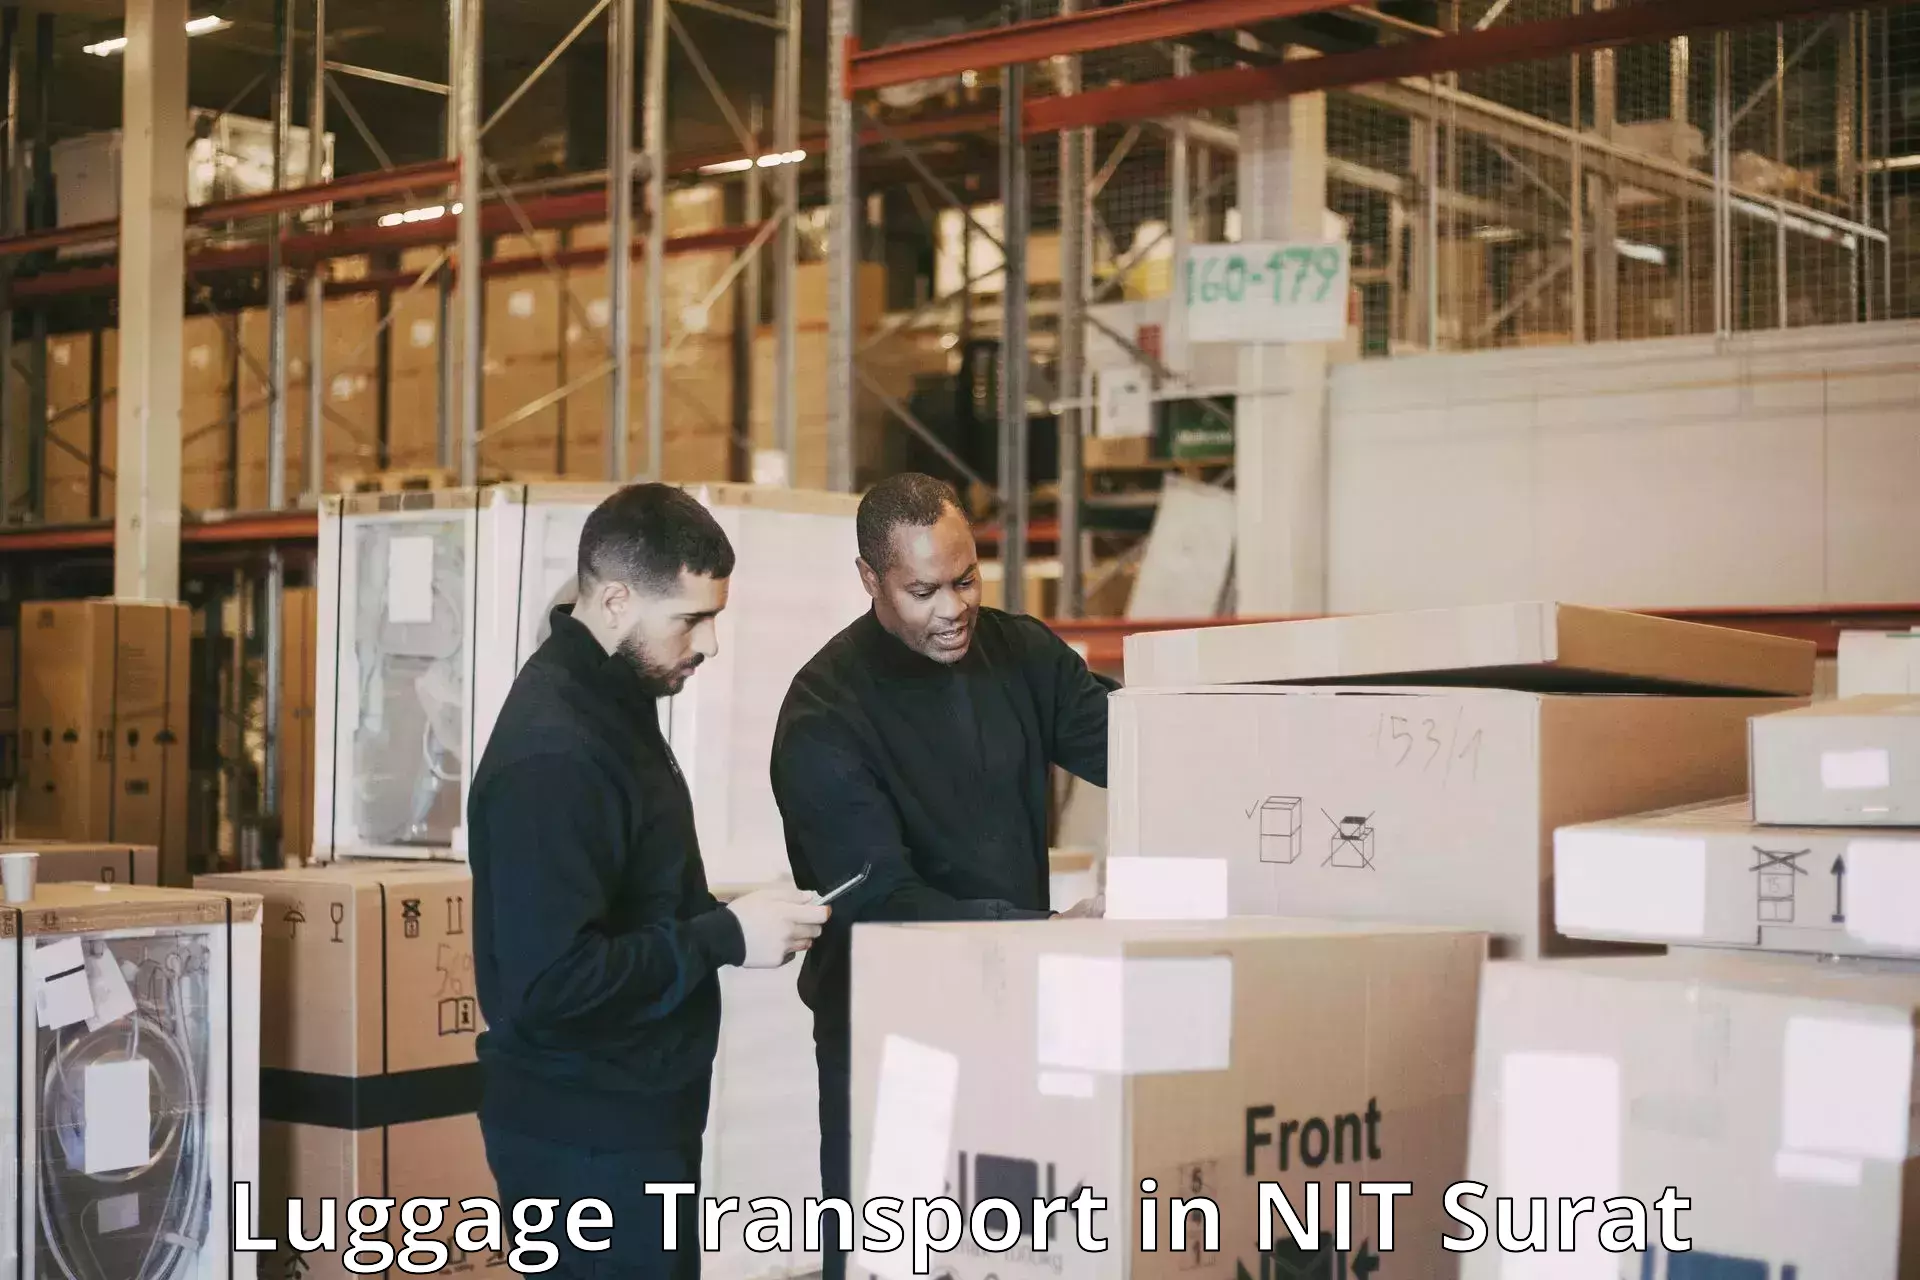 Baggage transport quote in NIT Surat